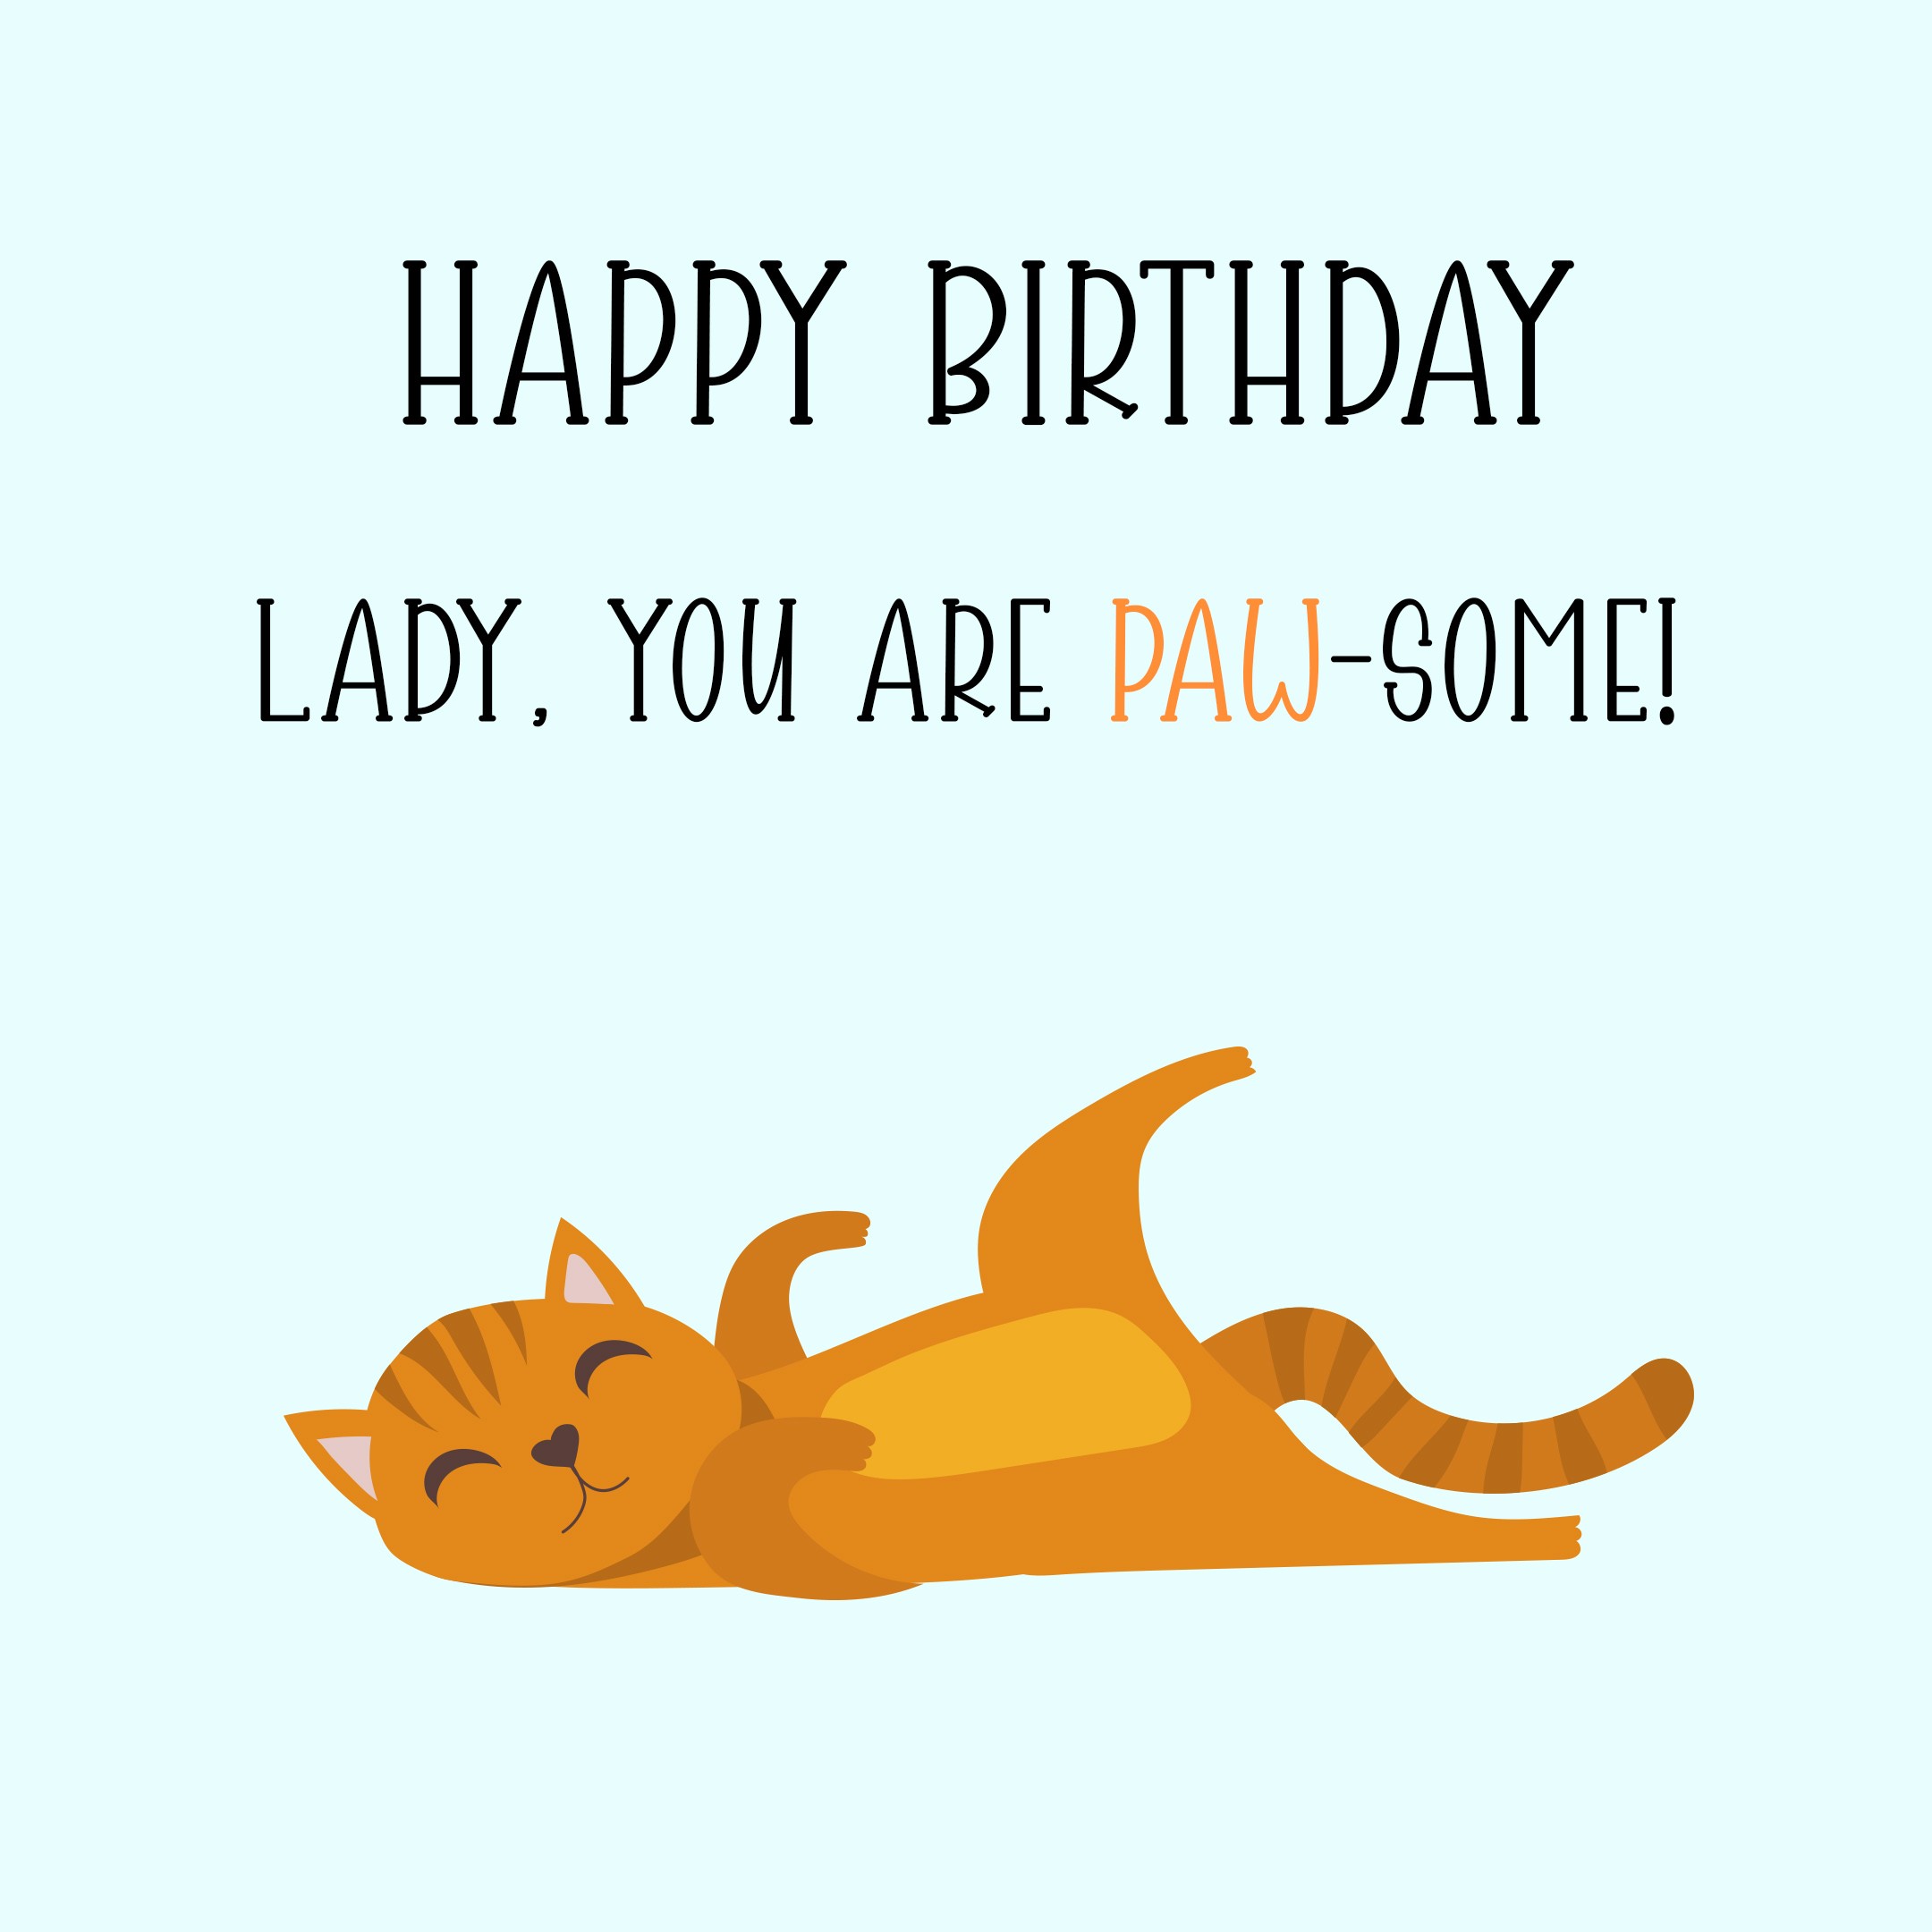 Free Funny Happy birthday Image For Woman With Cat - birthdayimg.com